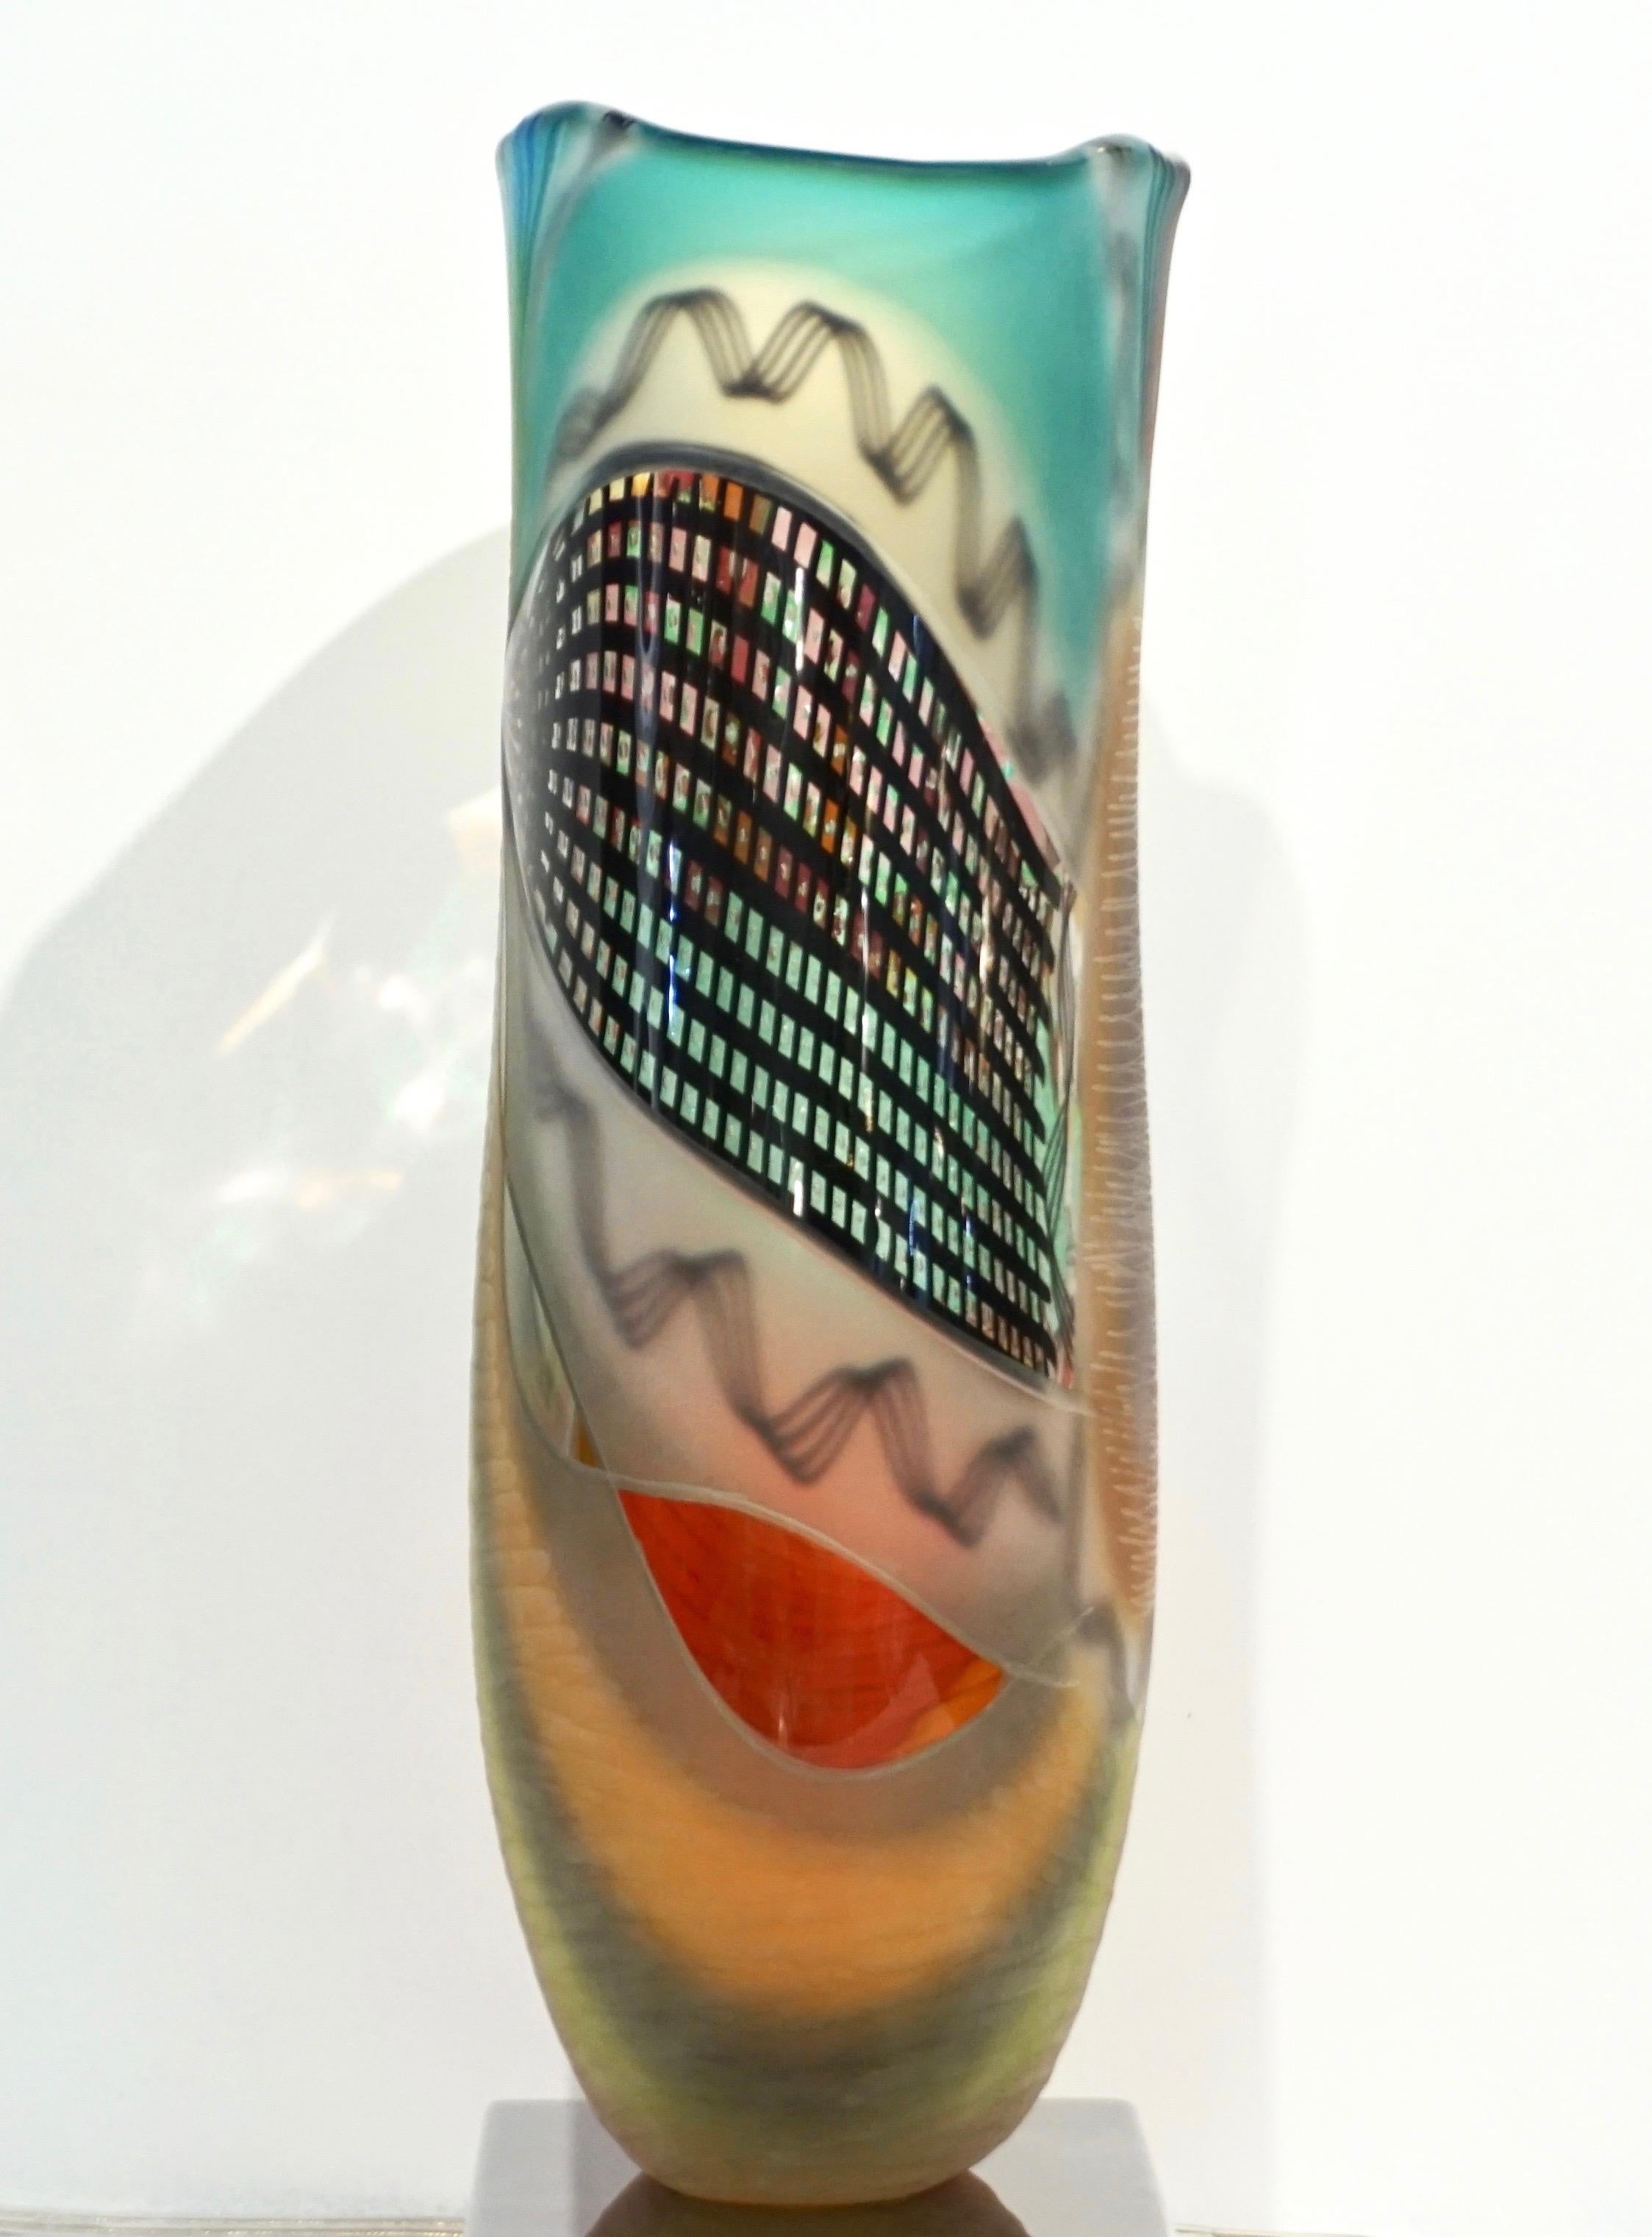 Contemporary Afro Celotto Early 2000s Italian Turquoise Yellow Red Orange Murano Glass Vase